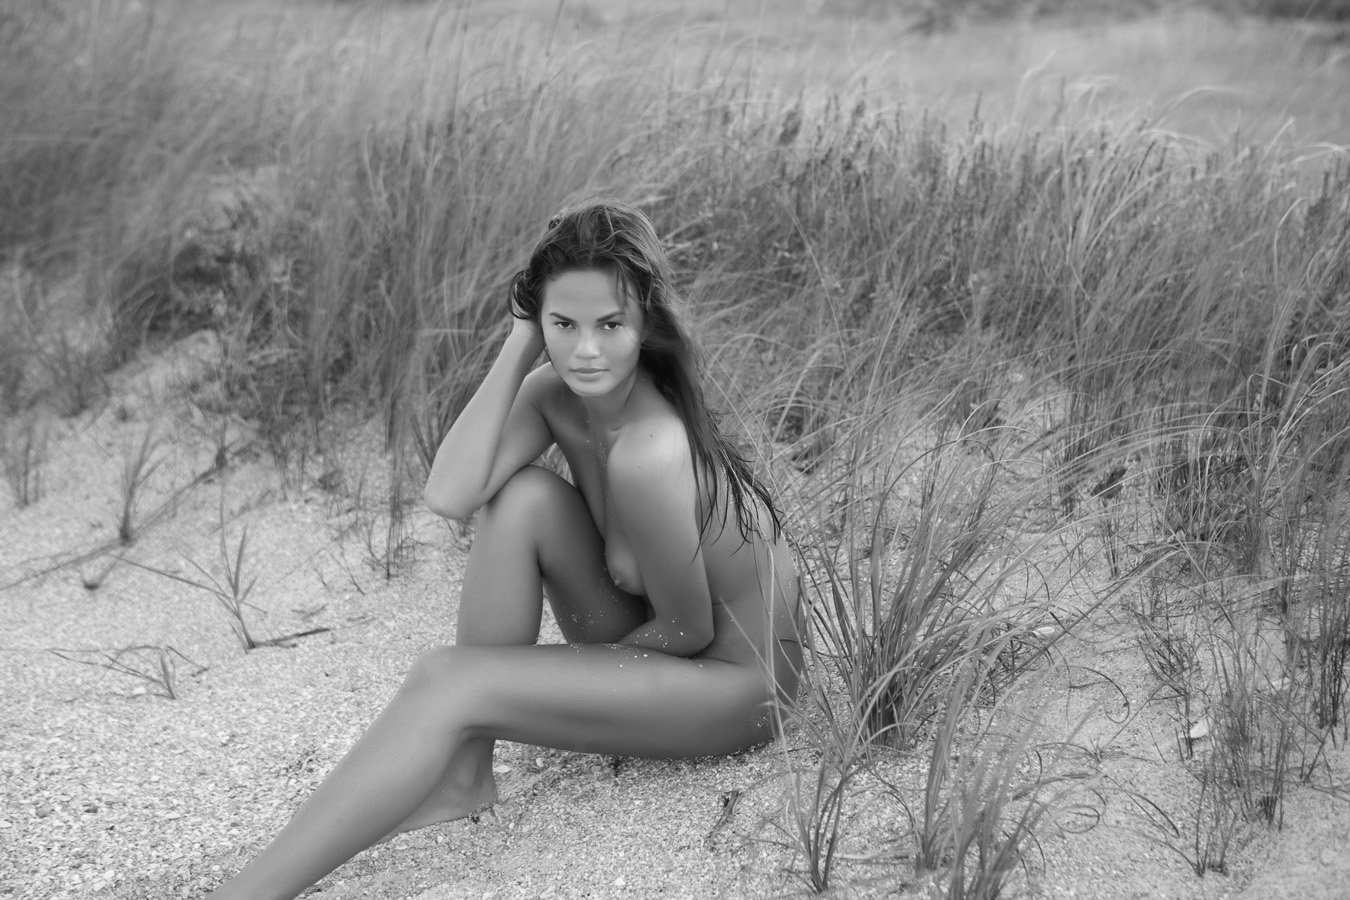 Chrissy Teigen Nude Photo Collection & Bio Here! - All Sorts